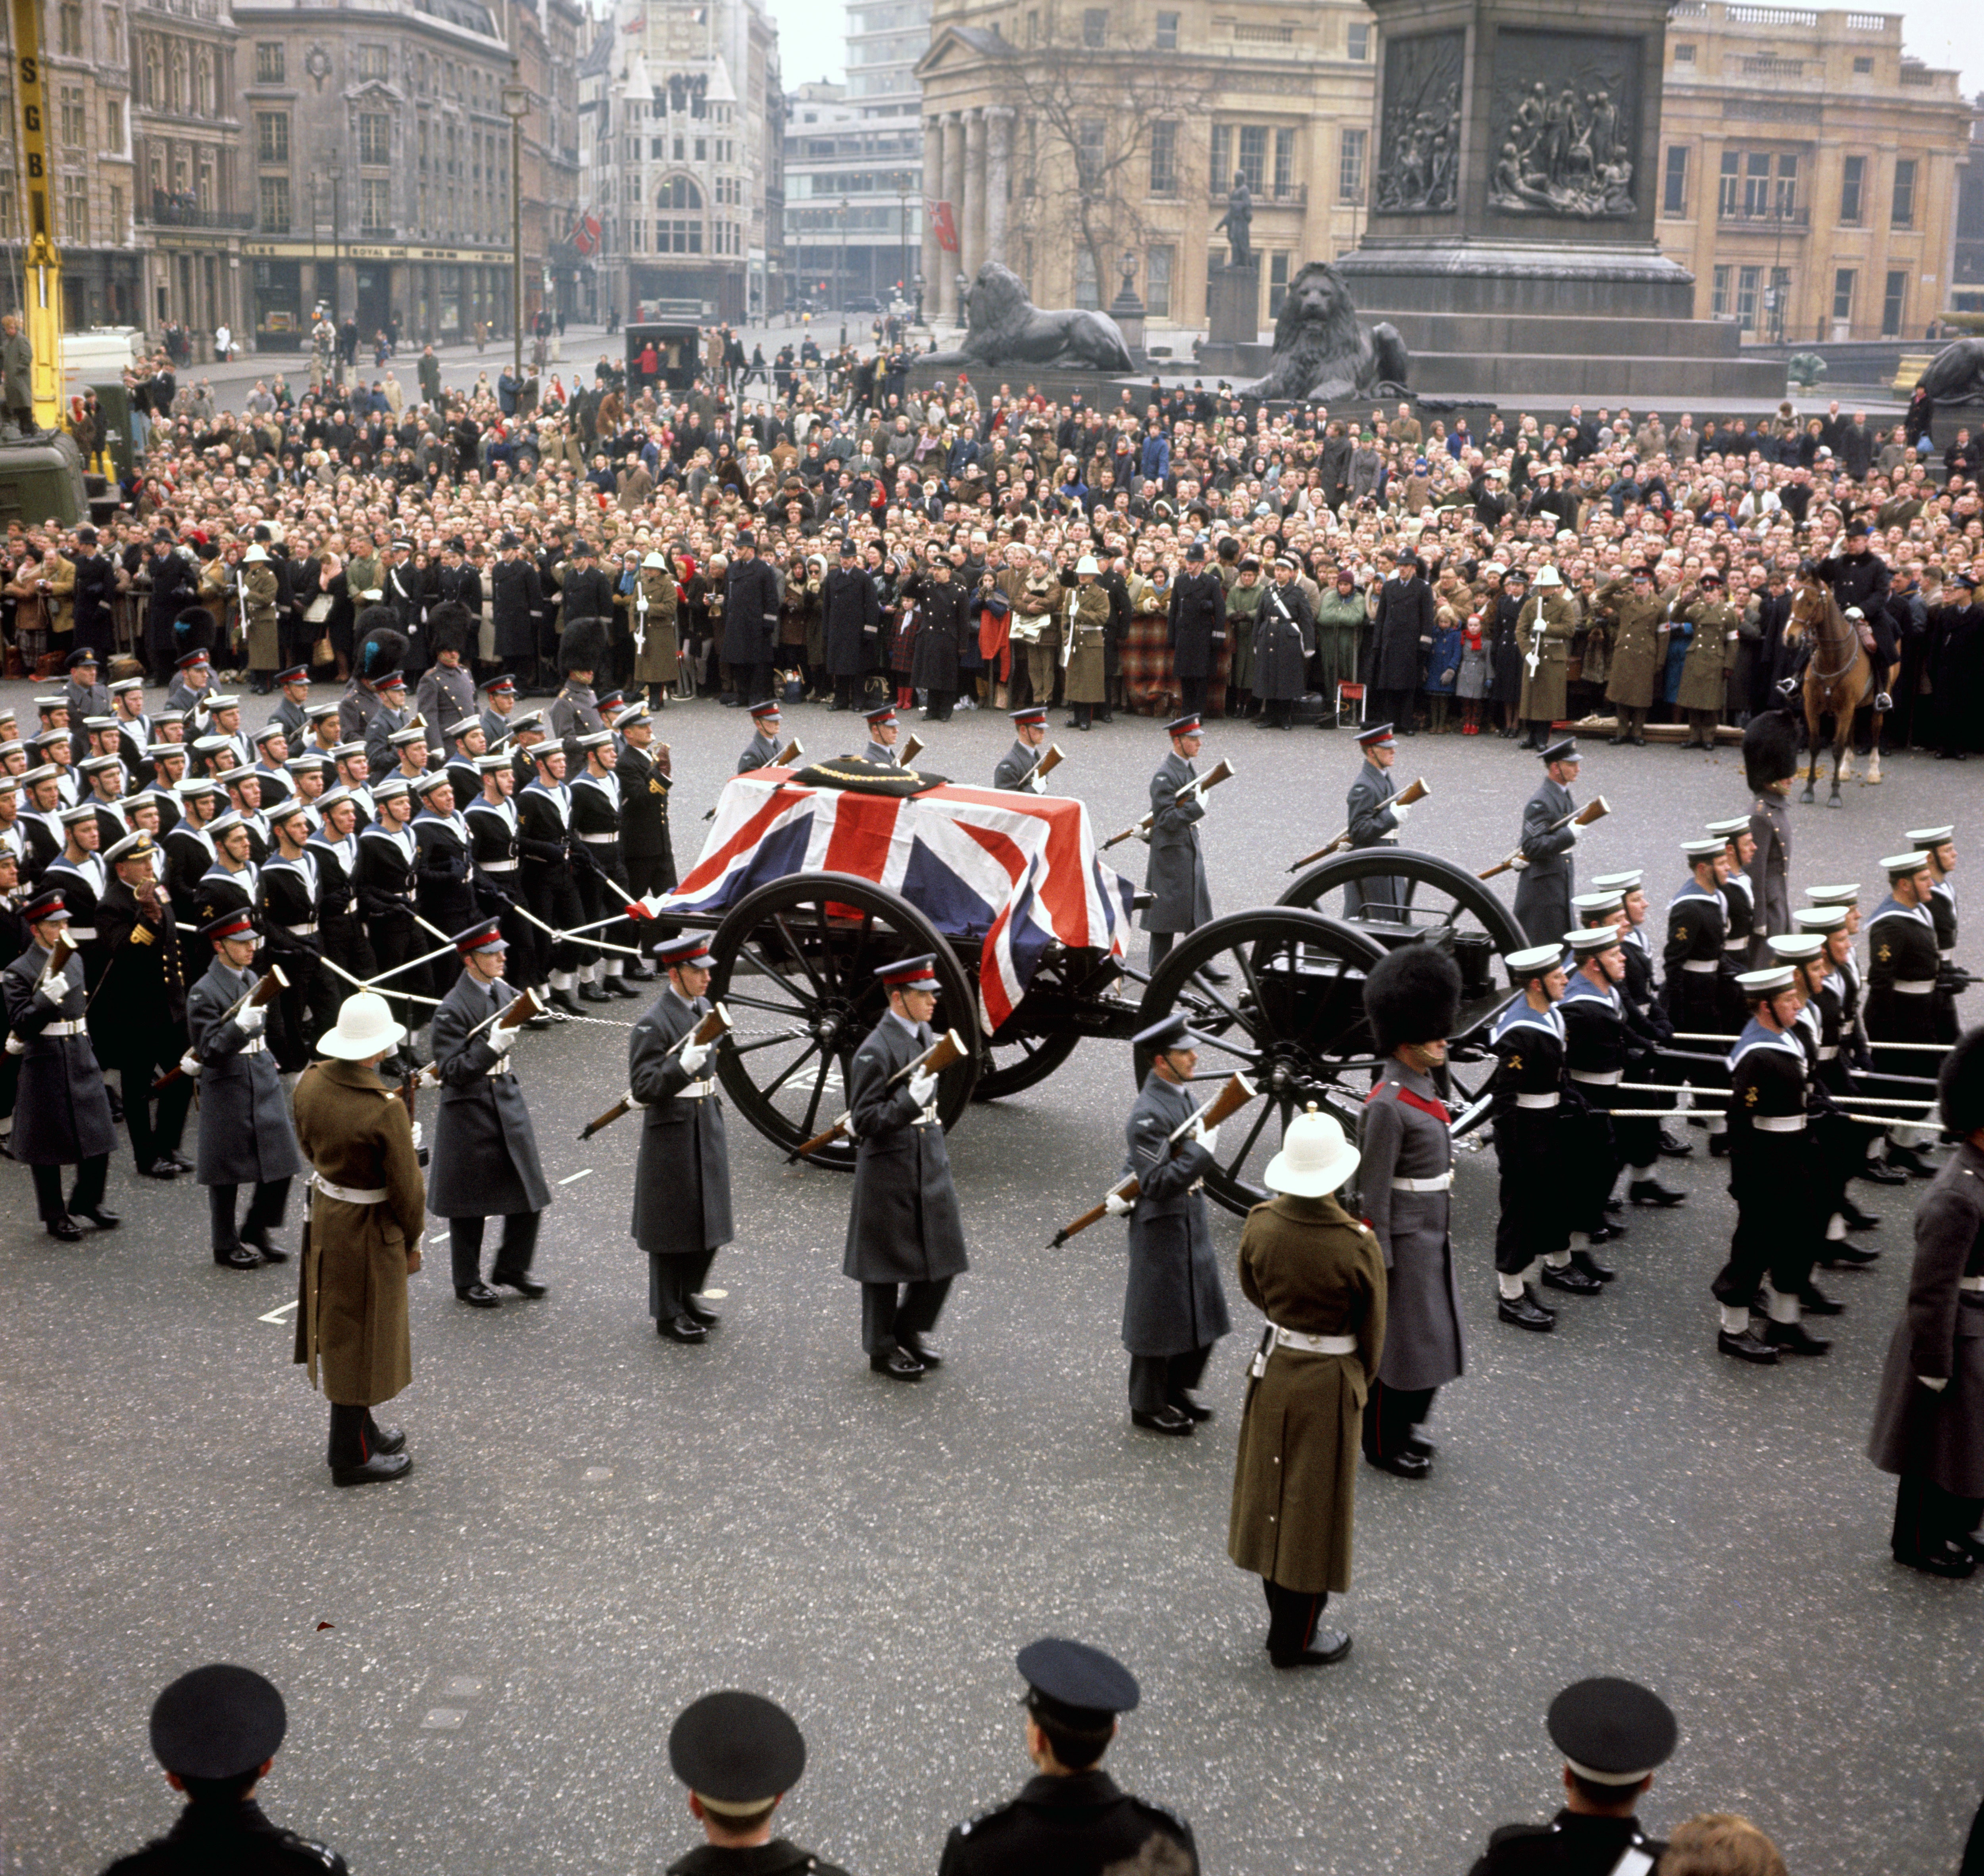 Queen Elizabeth II will be having a state funeral - like Sir Winston Churchill’s here in 1965